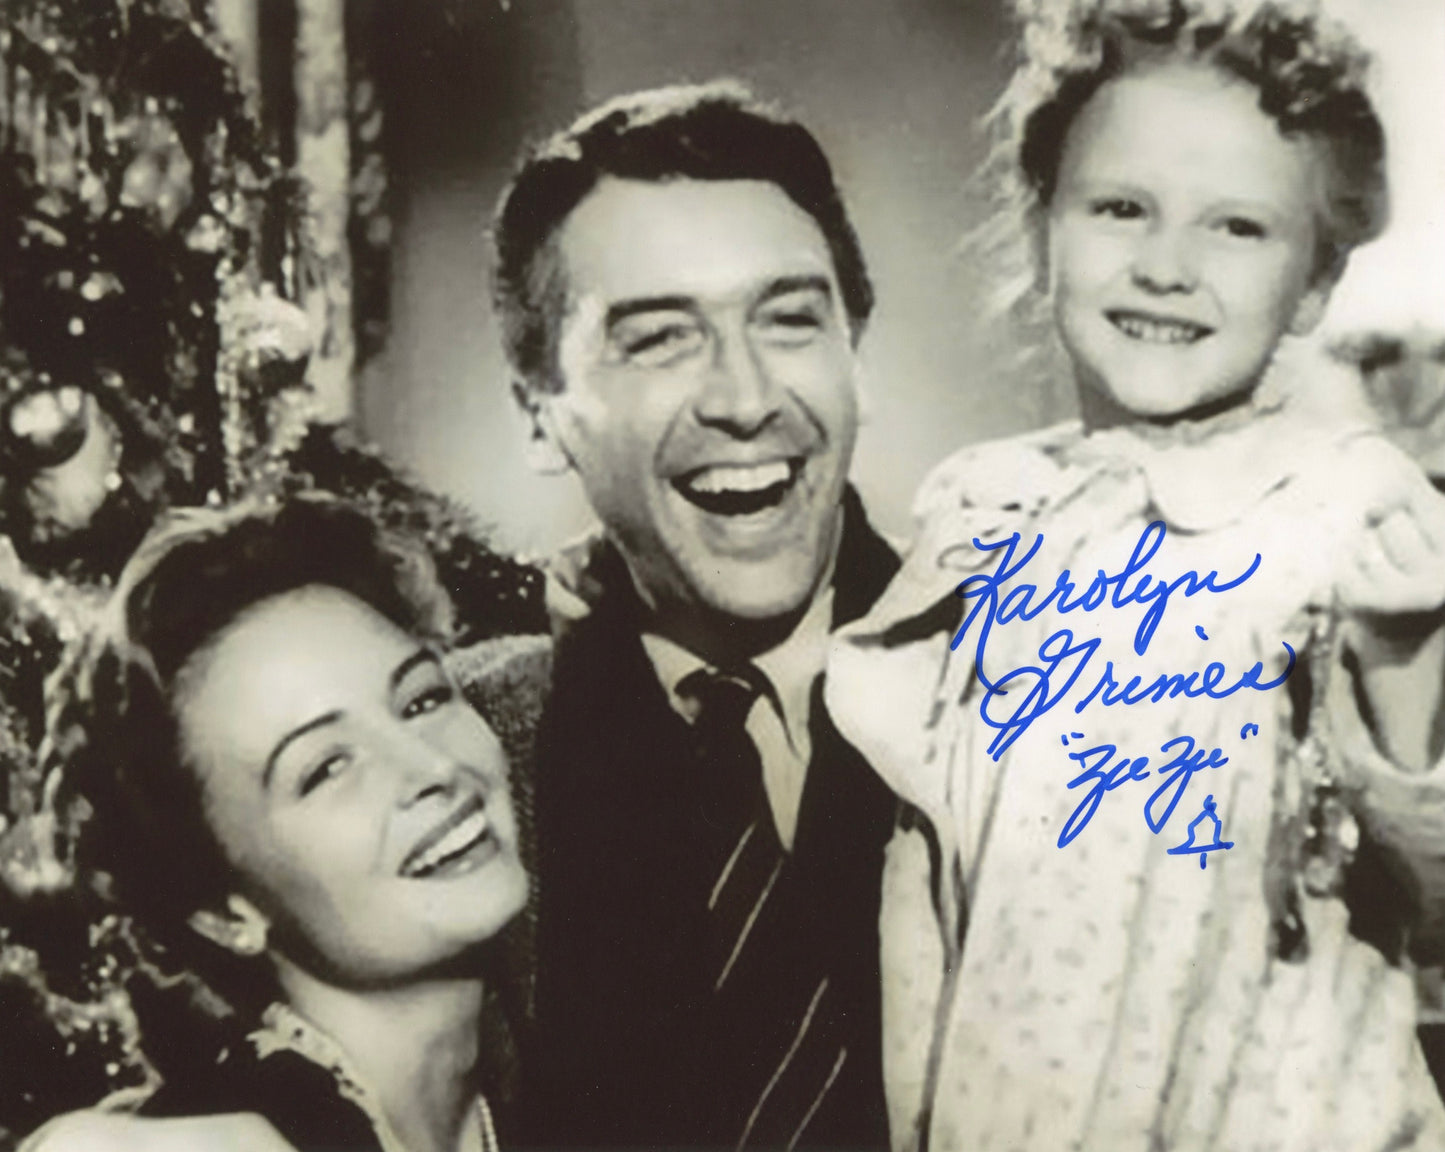 KAROLYN GRIMES, "Zuzu" from IT'S A WONDERFUL LIFE (Autographed photo)